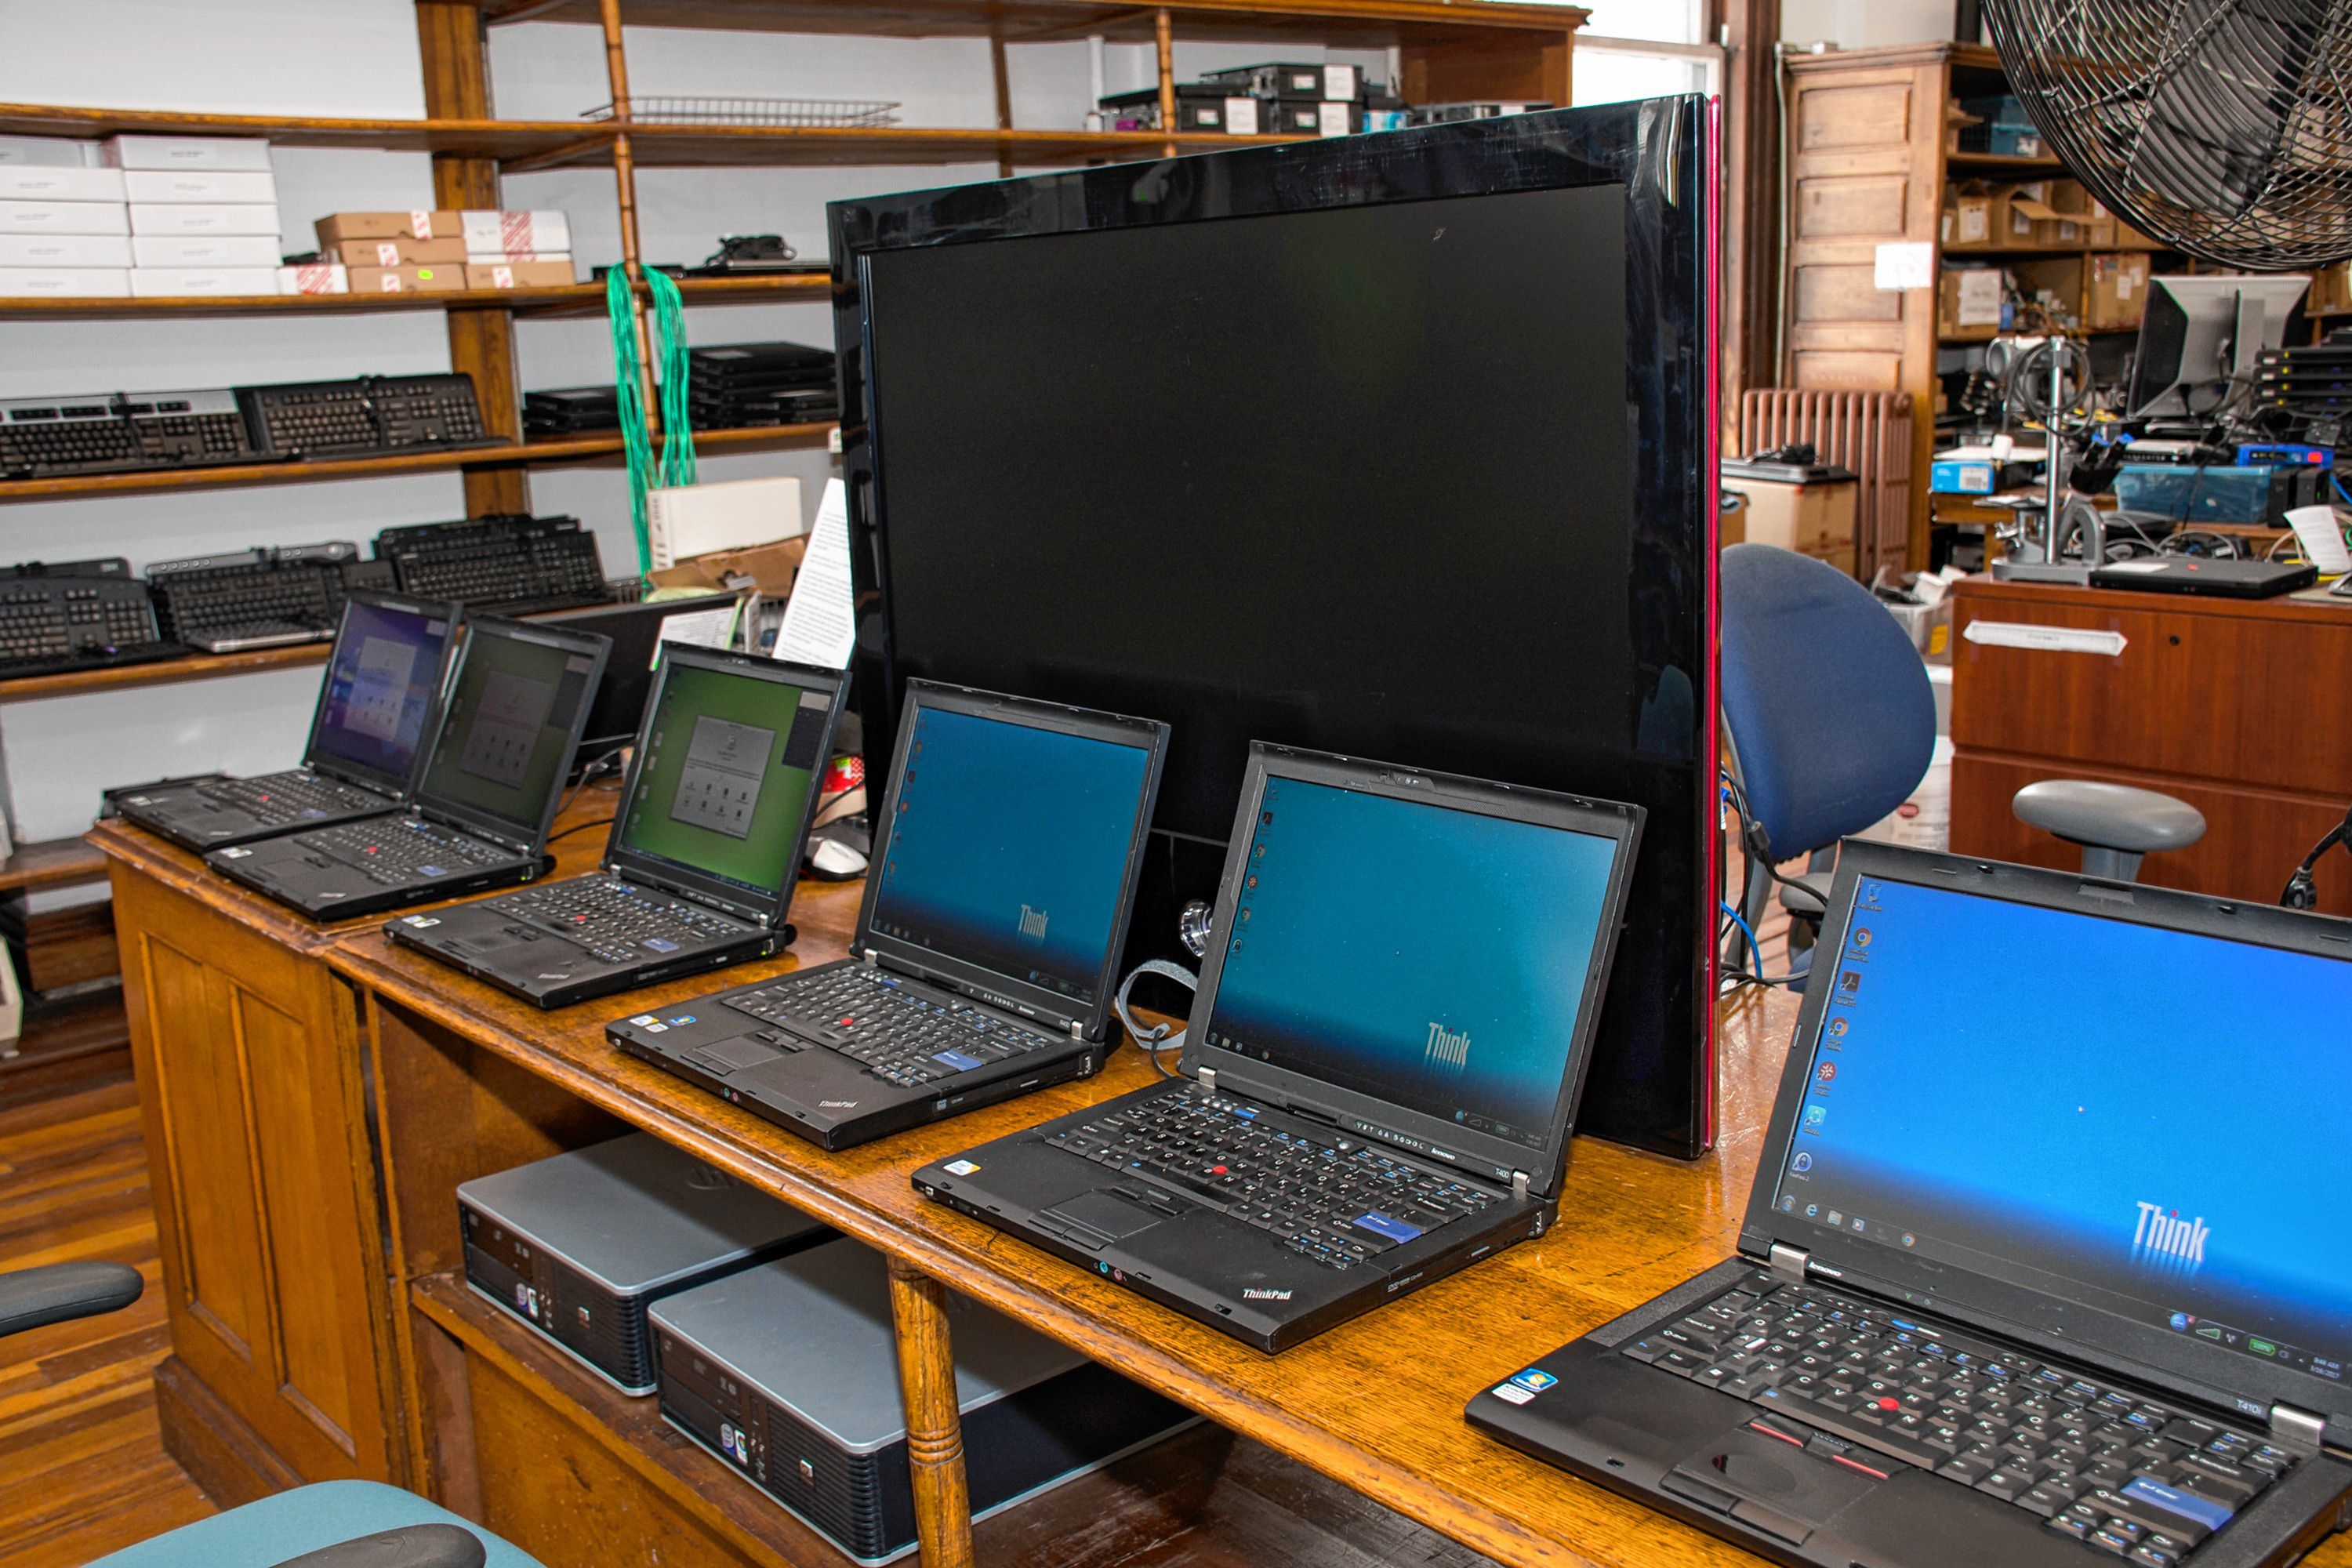 Some of the refurbished ThinkPads for sale. Nancy Nutile-McMenemy photograph